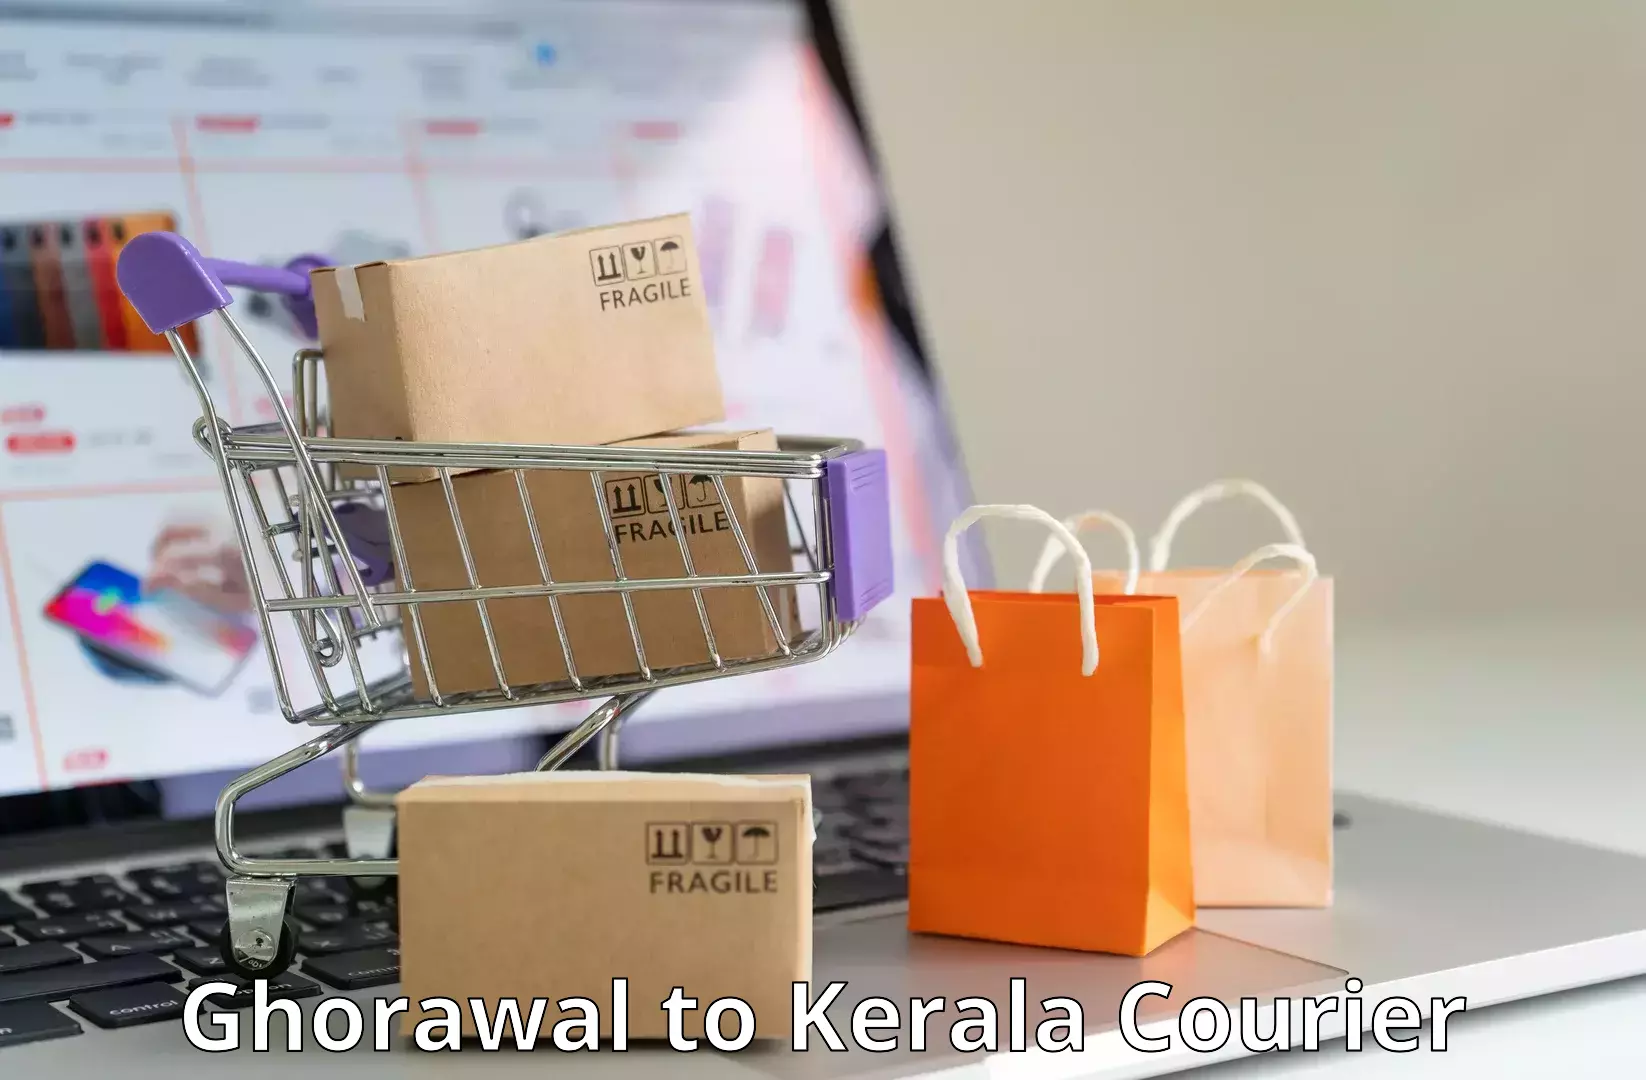 Express package delivery Ghorawal to Cochin Port Kochi